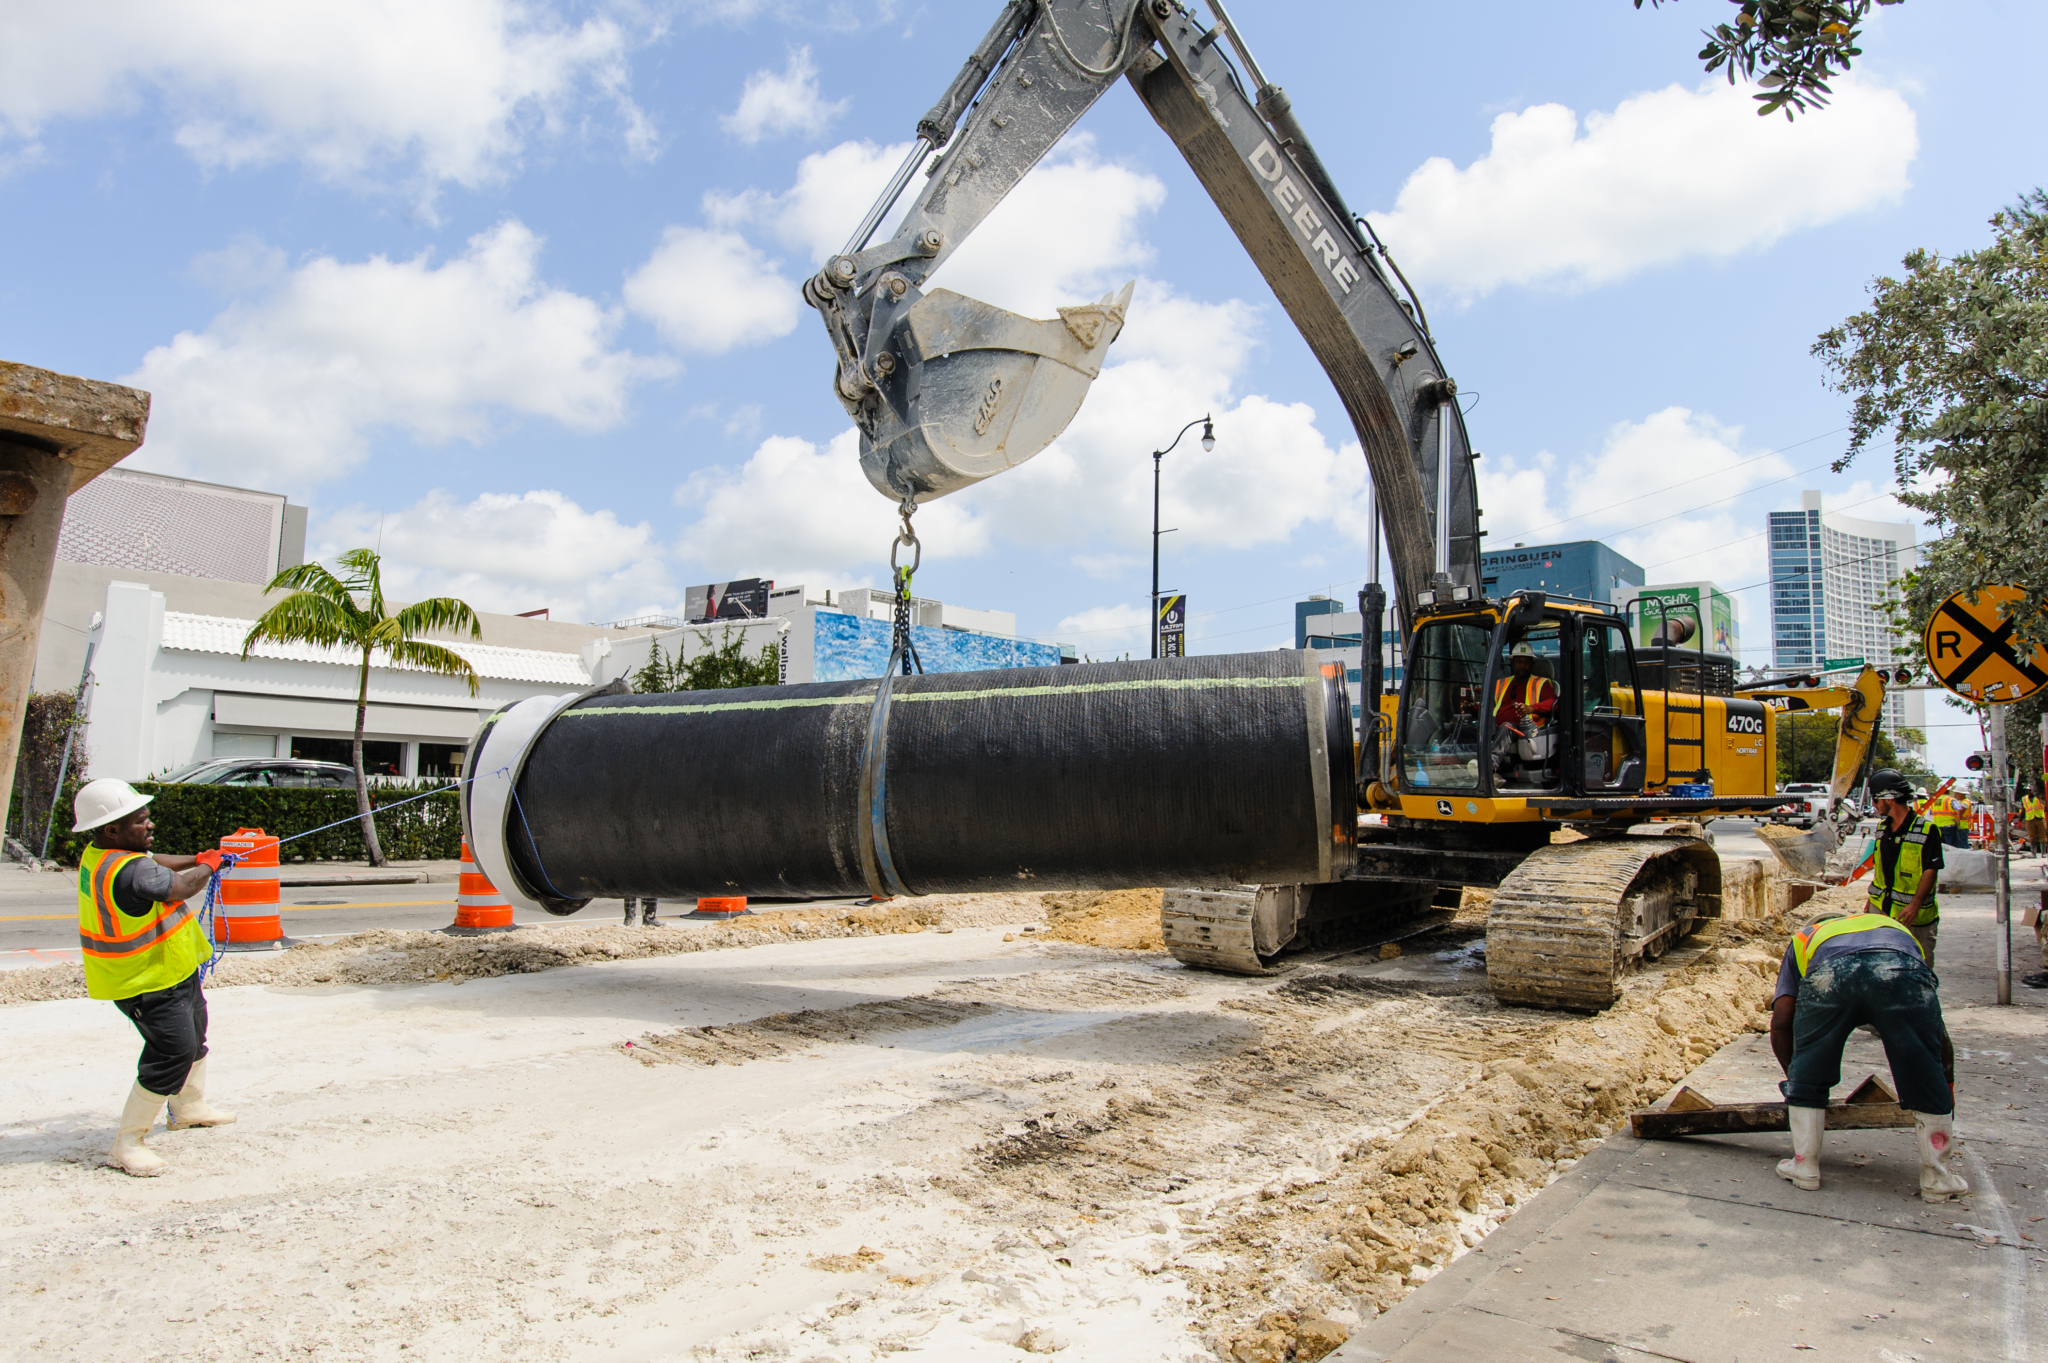 A Miami-Dade Water and Sewer Department crew, featured in the June issue, transports a piece of pipe for installation. Miami-Dade is the largest water and wastewater utility in the southeastern United States, serving 2.3 million people, plus thousands of daily visitors, and covering 400 square miles.